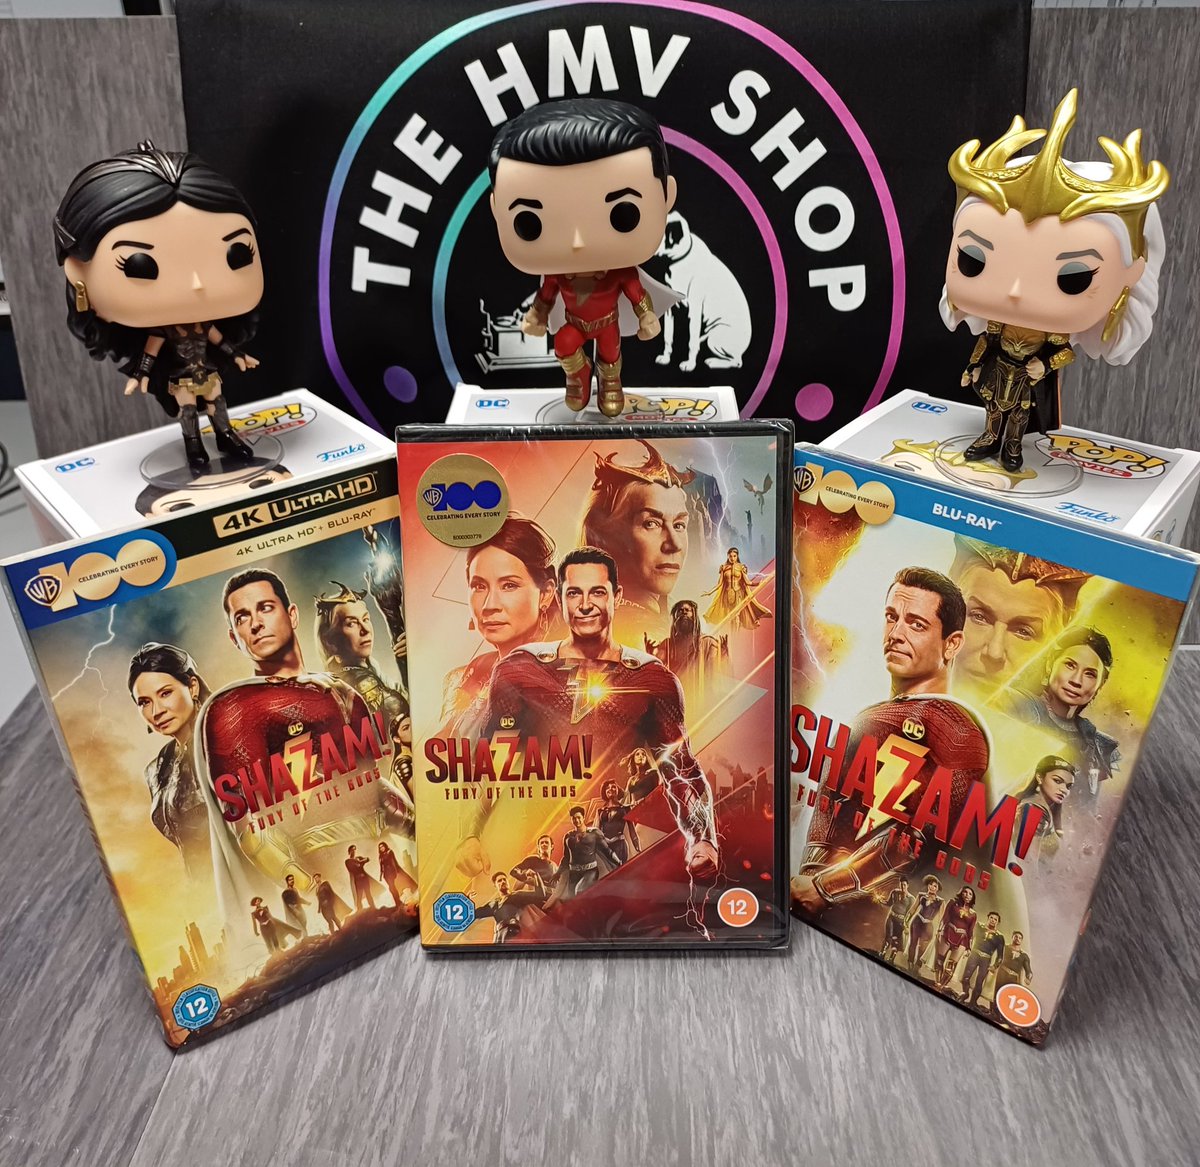 #newmoviemonday 
#shazam Fury of the Gods out today!!
Don't forget to pick up your pops aswell. #funkopop